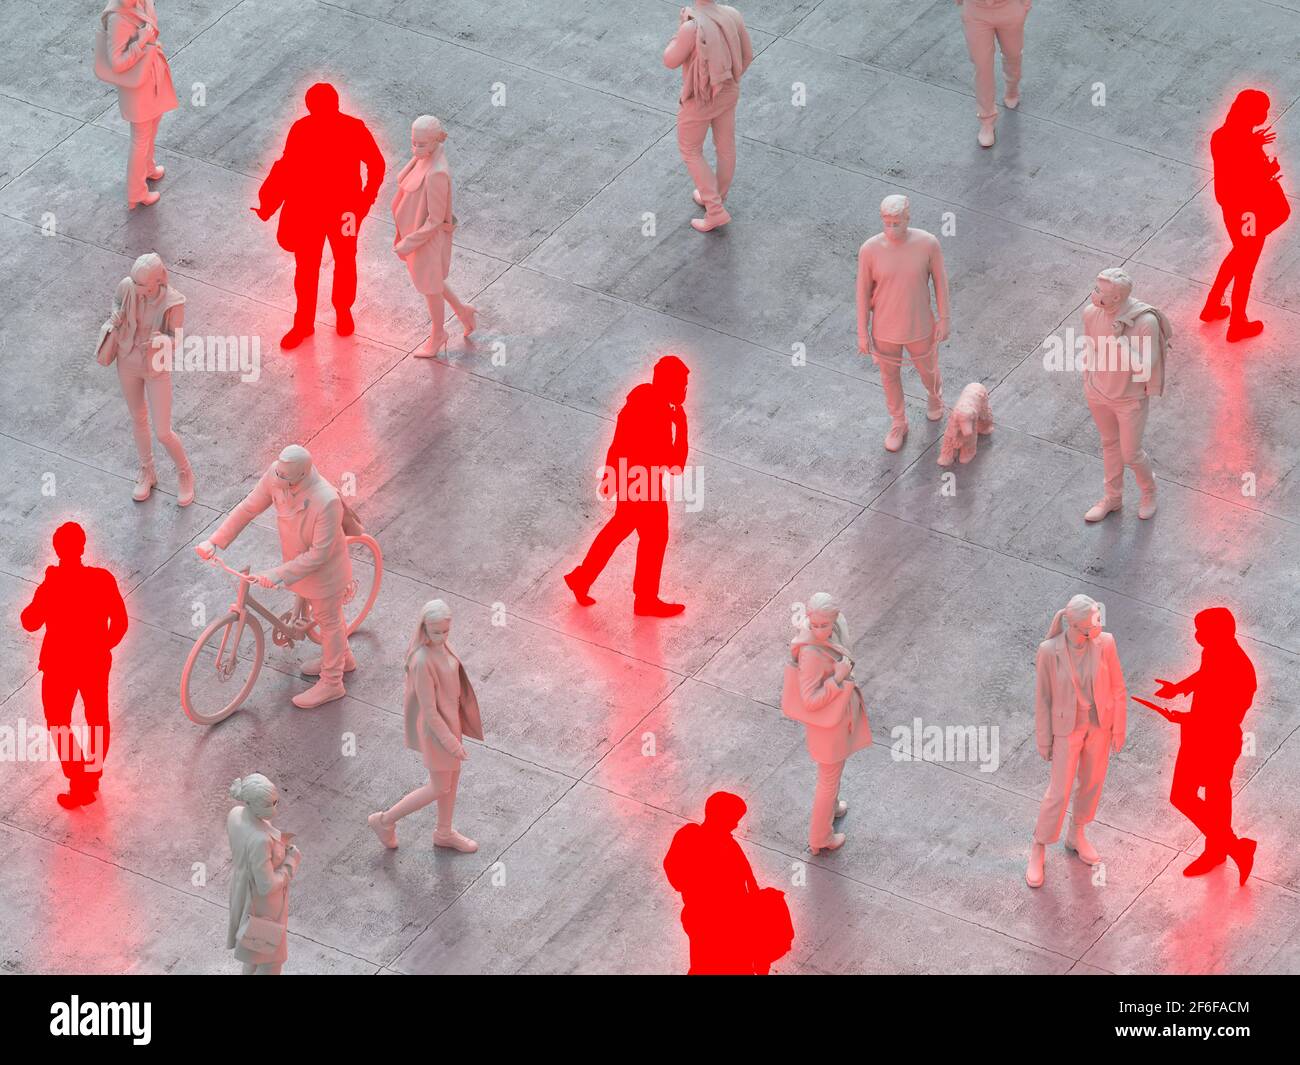 View from above the crowd. Concept of dangerous subject regarding terrorism, pandemic, coronavirus contagion, individual detection. 3d rendering Stock Photo